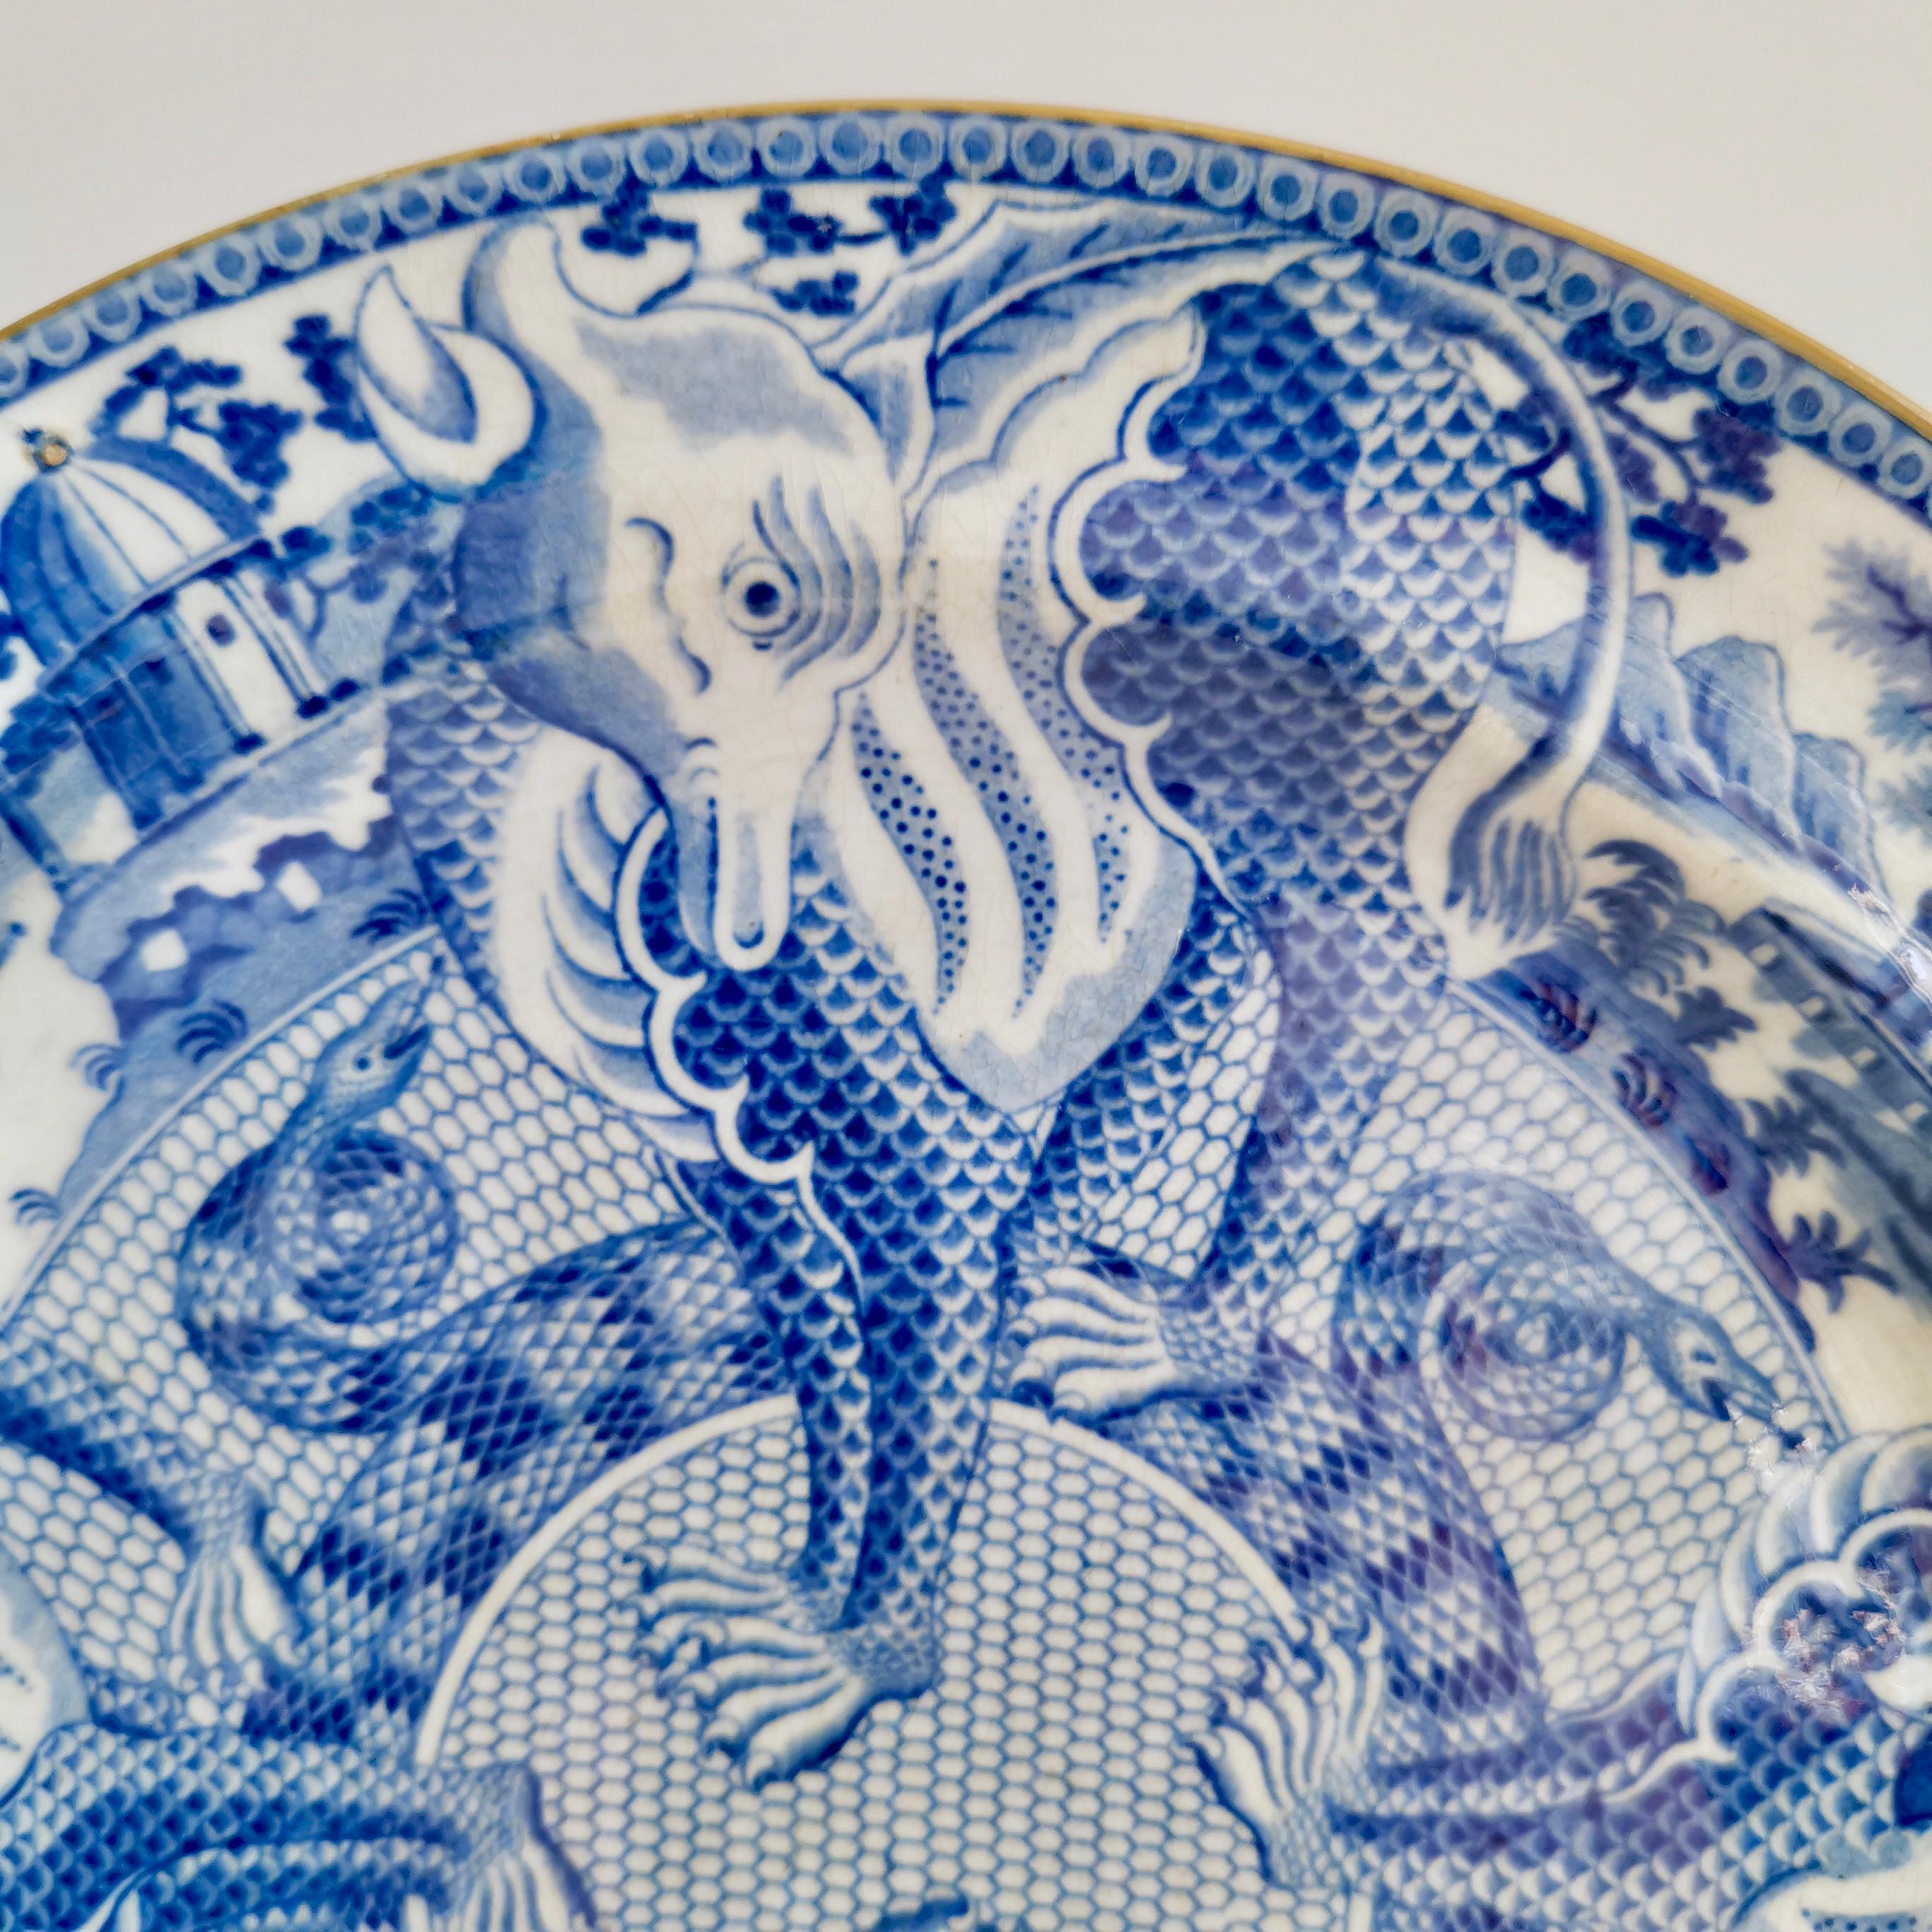 Early 19th Century English Pearlware Plate, Blue & White Transfer Dragons, Snakes, Regency ca 1820